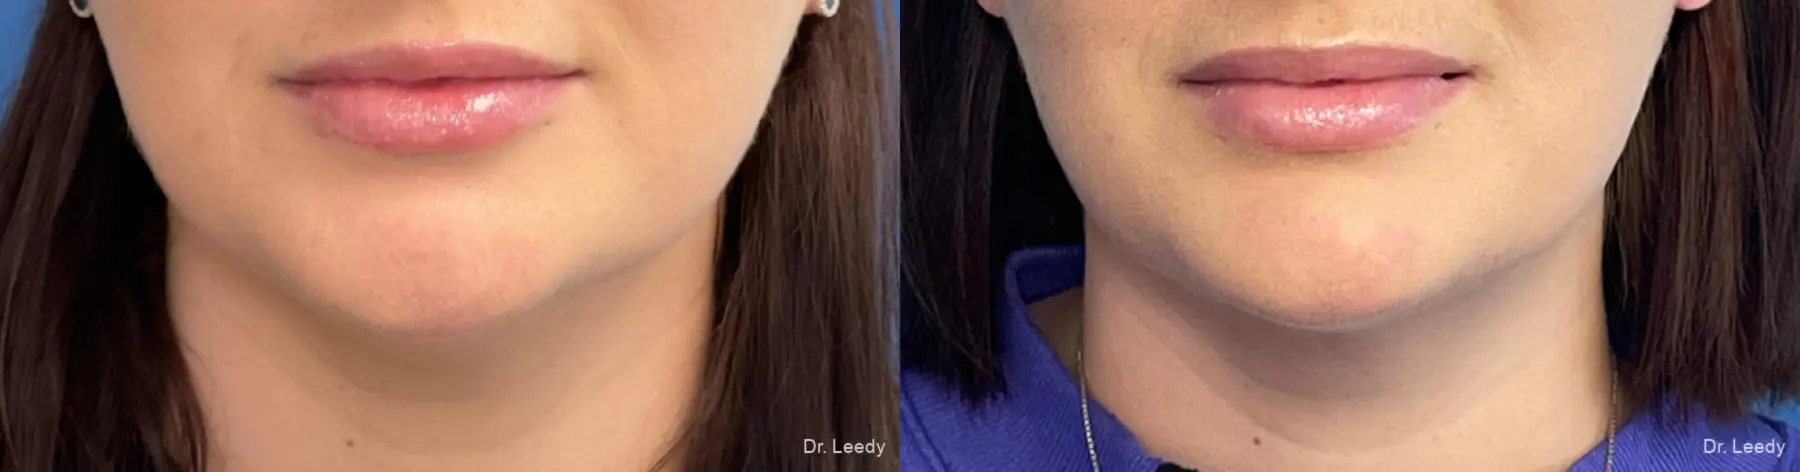 SmartLipo® - Chin: Patient 3 - Before and After  